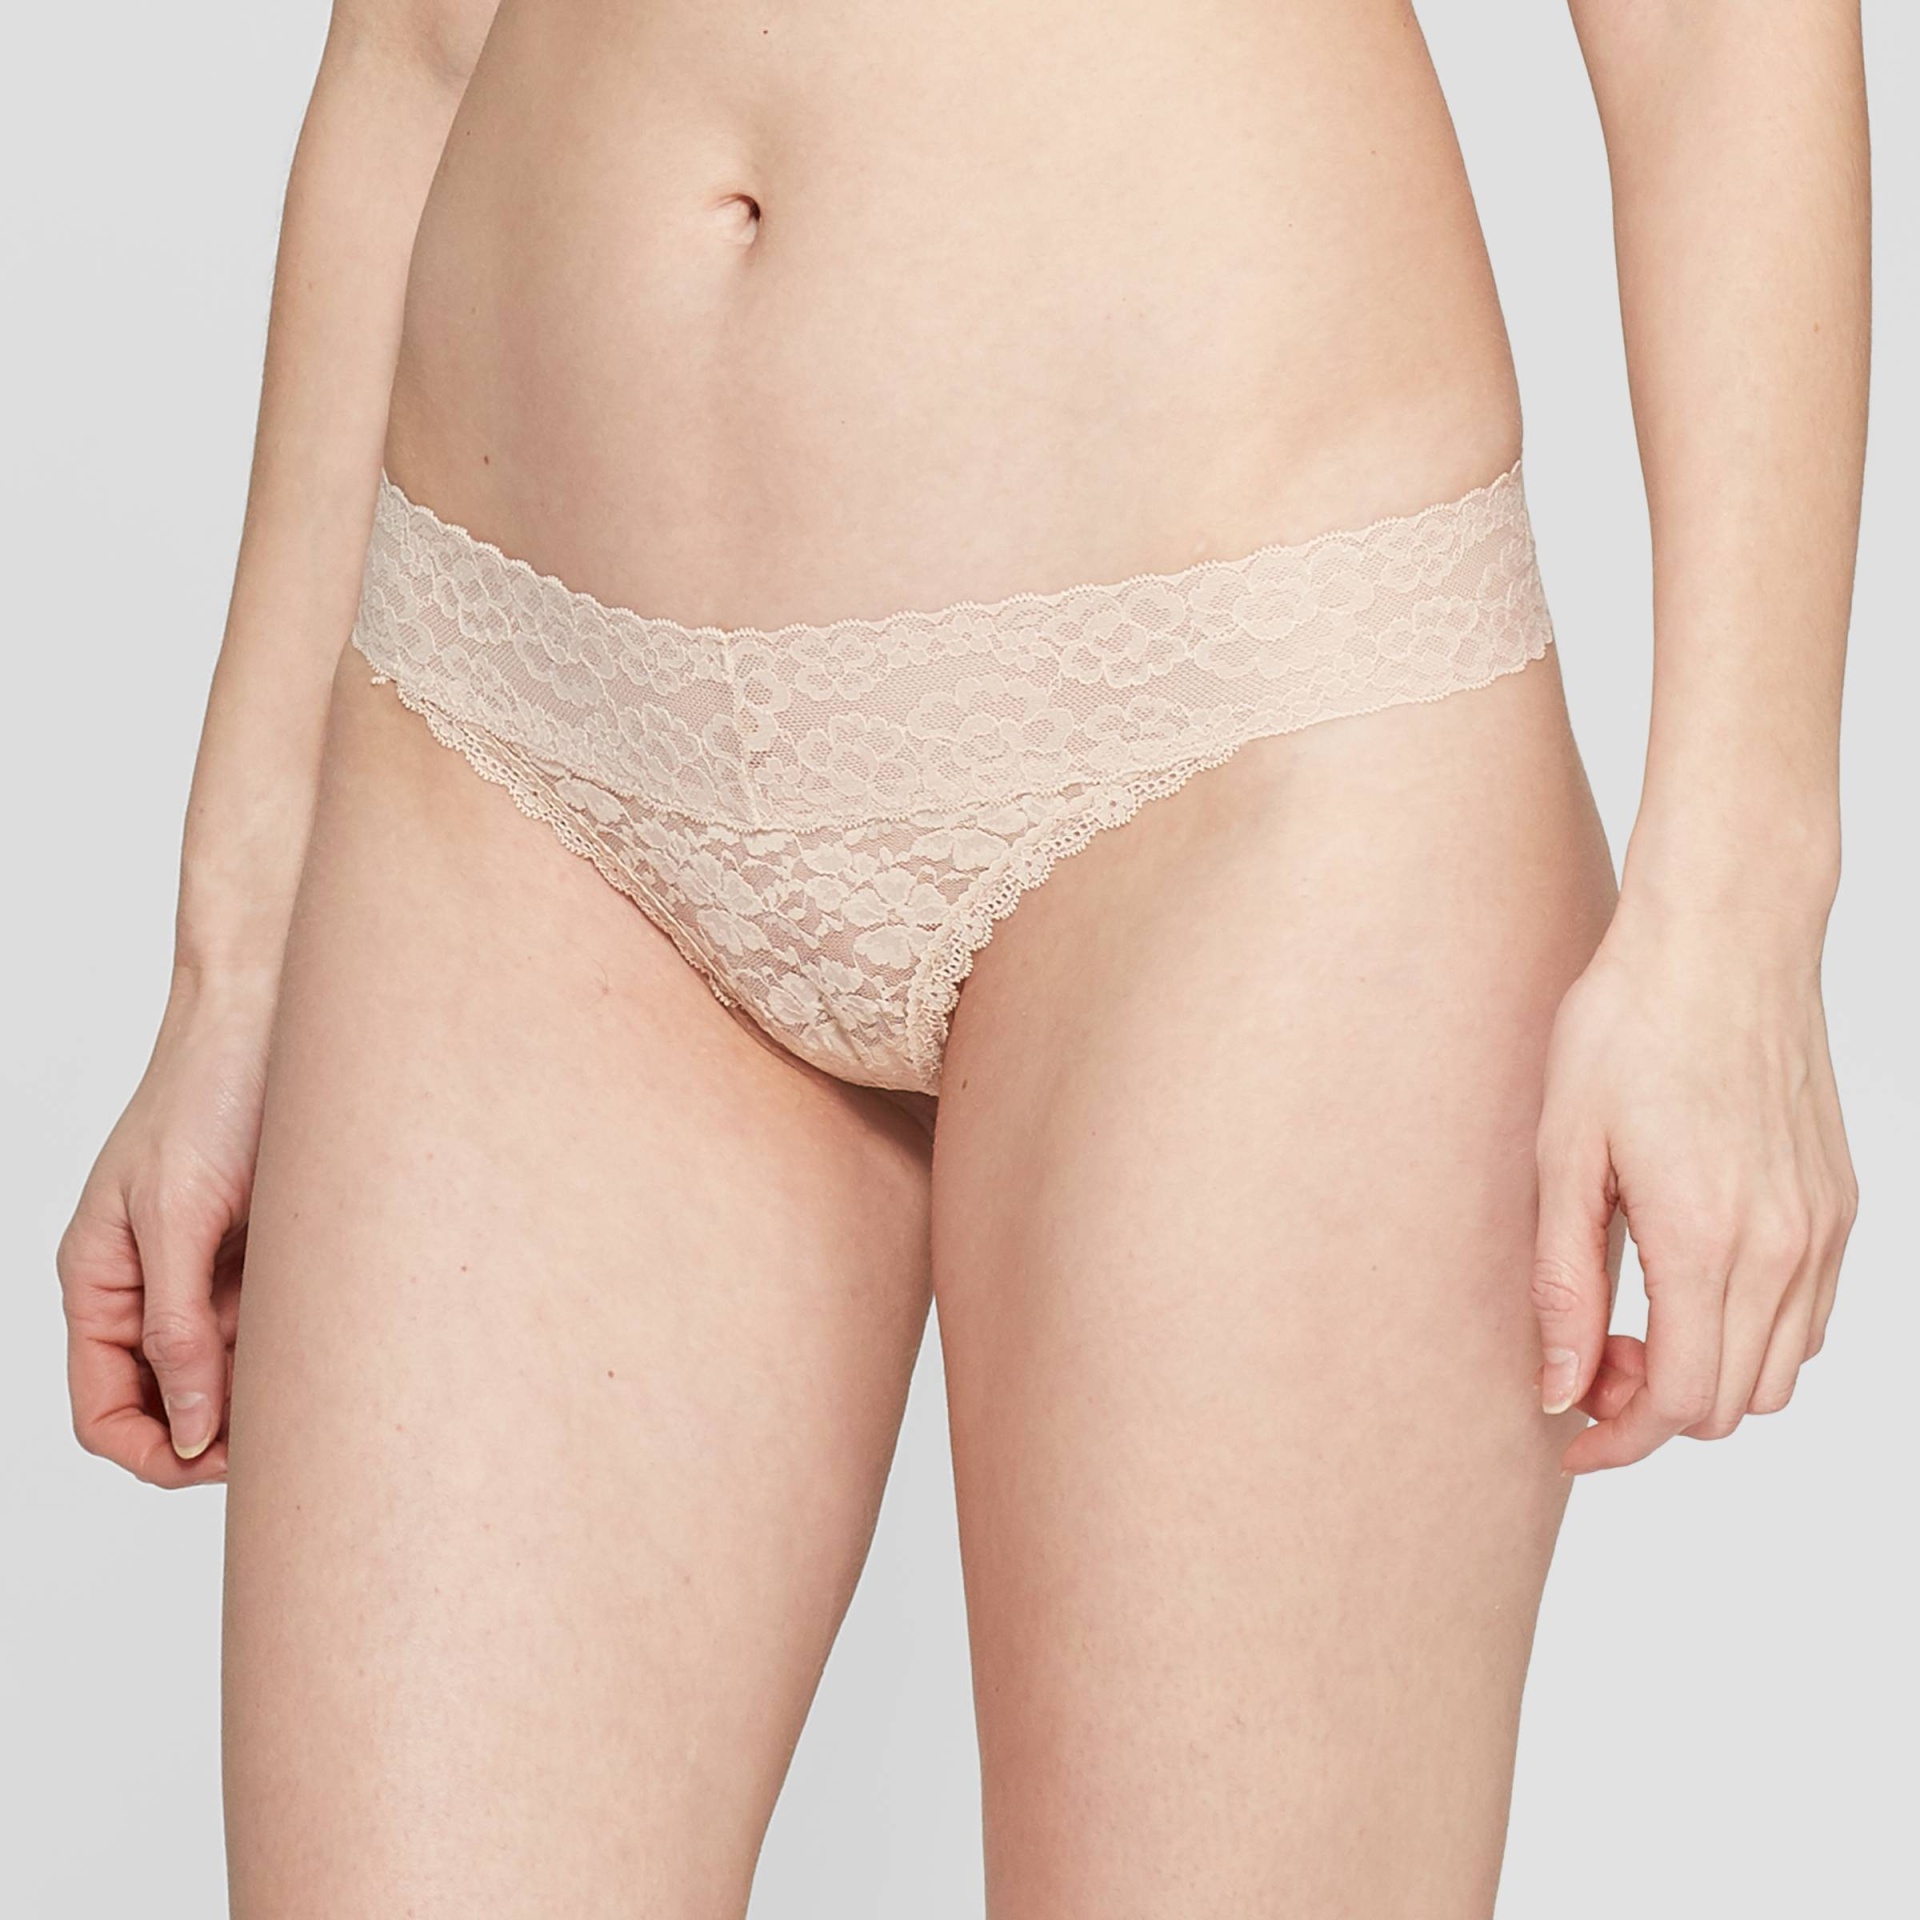 Women's All Over Lace Thong - Auden Soft Beige M 1 ct